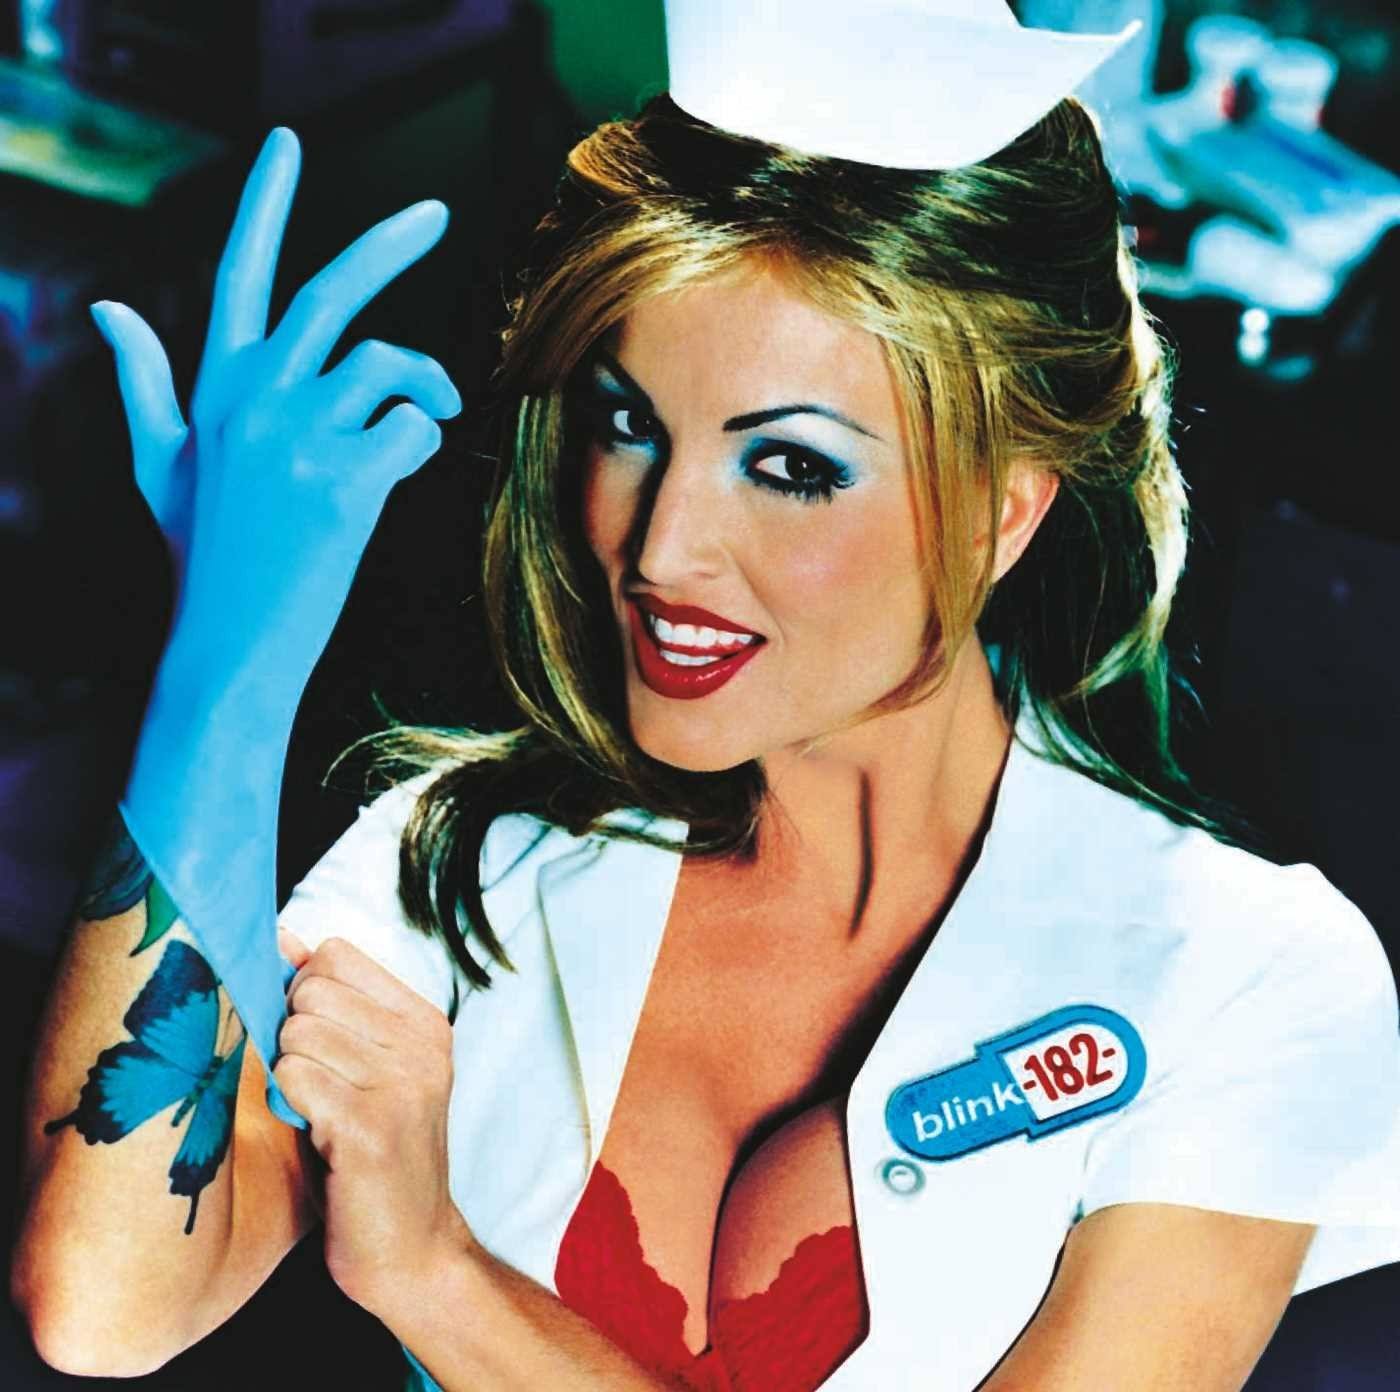 Enema of the State - Blink 182